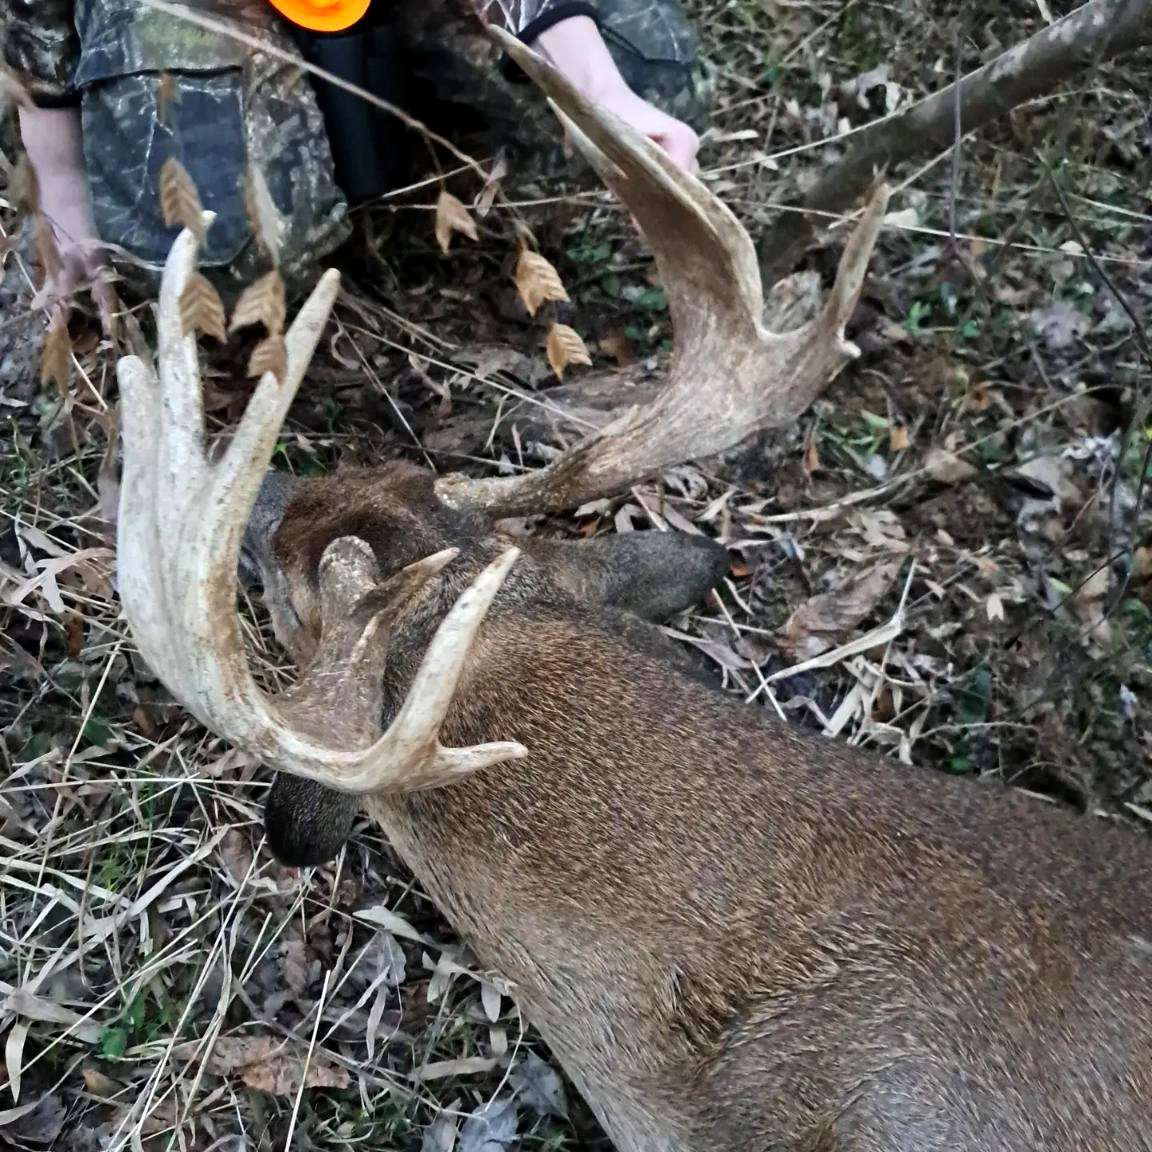 While the buck wasn't particularly tall or wide, it featured amazing mass all the way out.